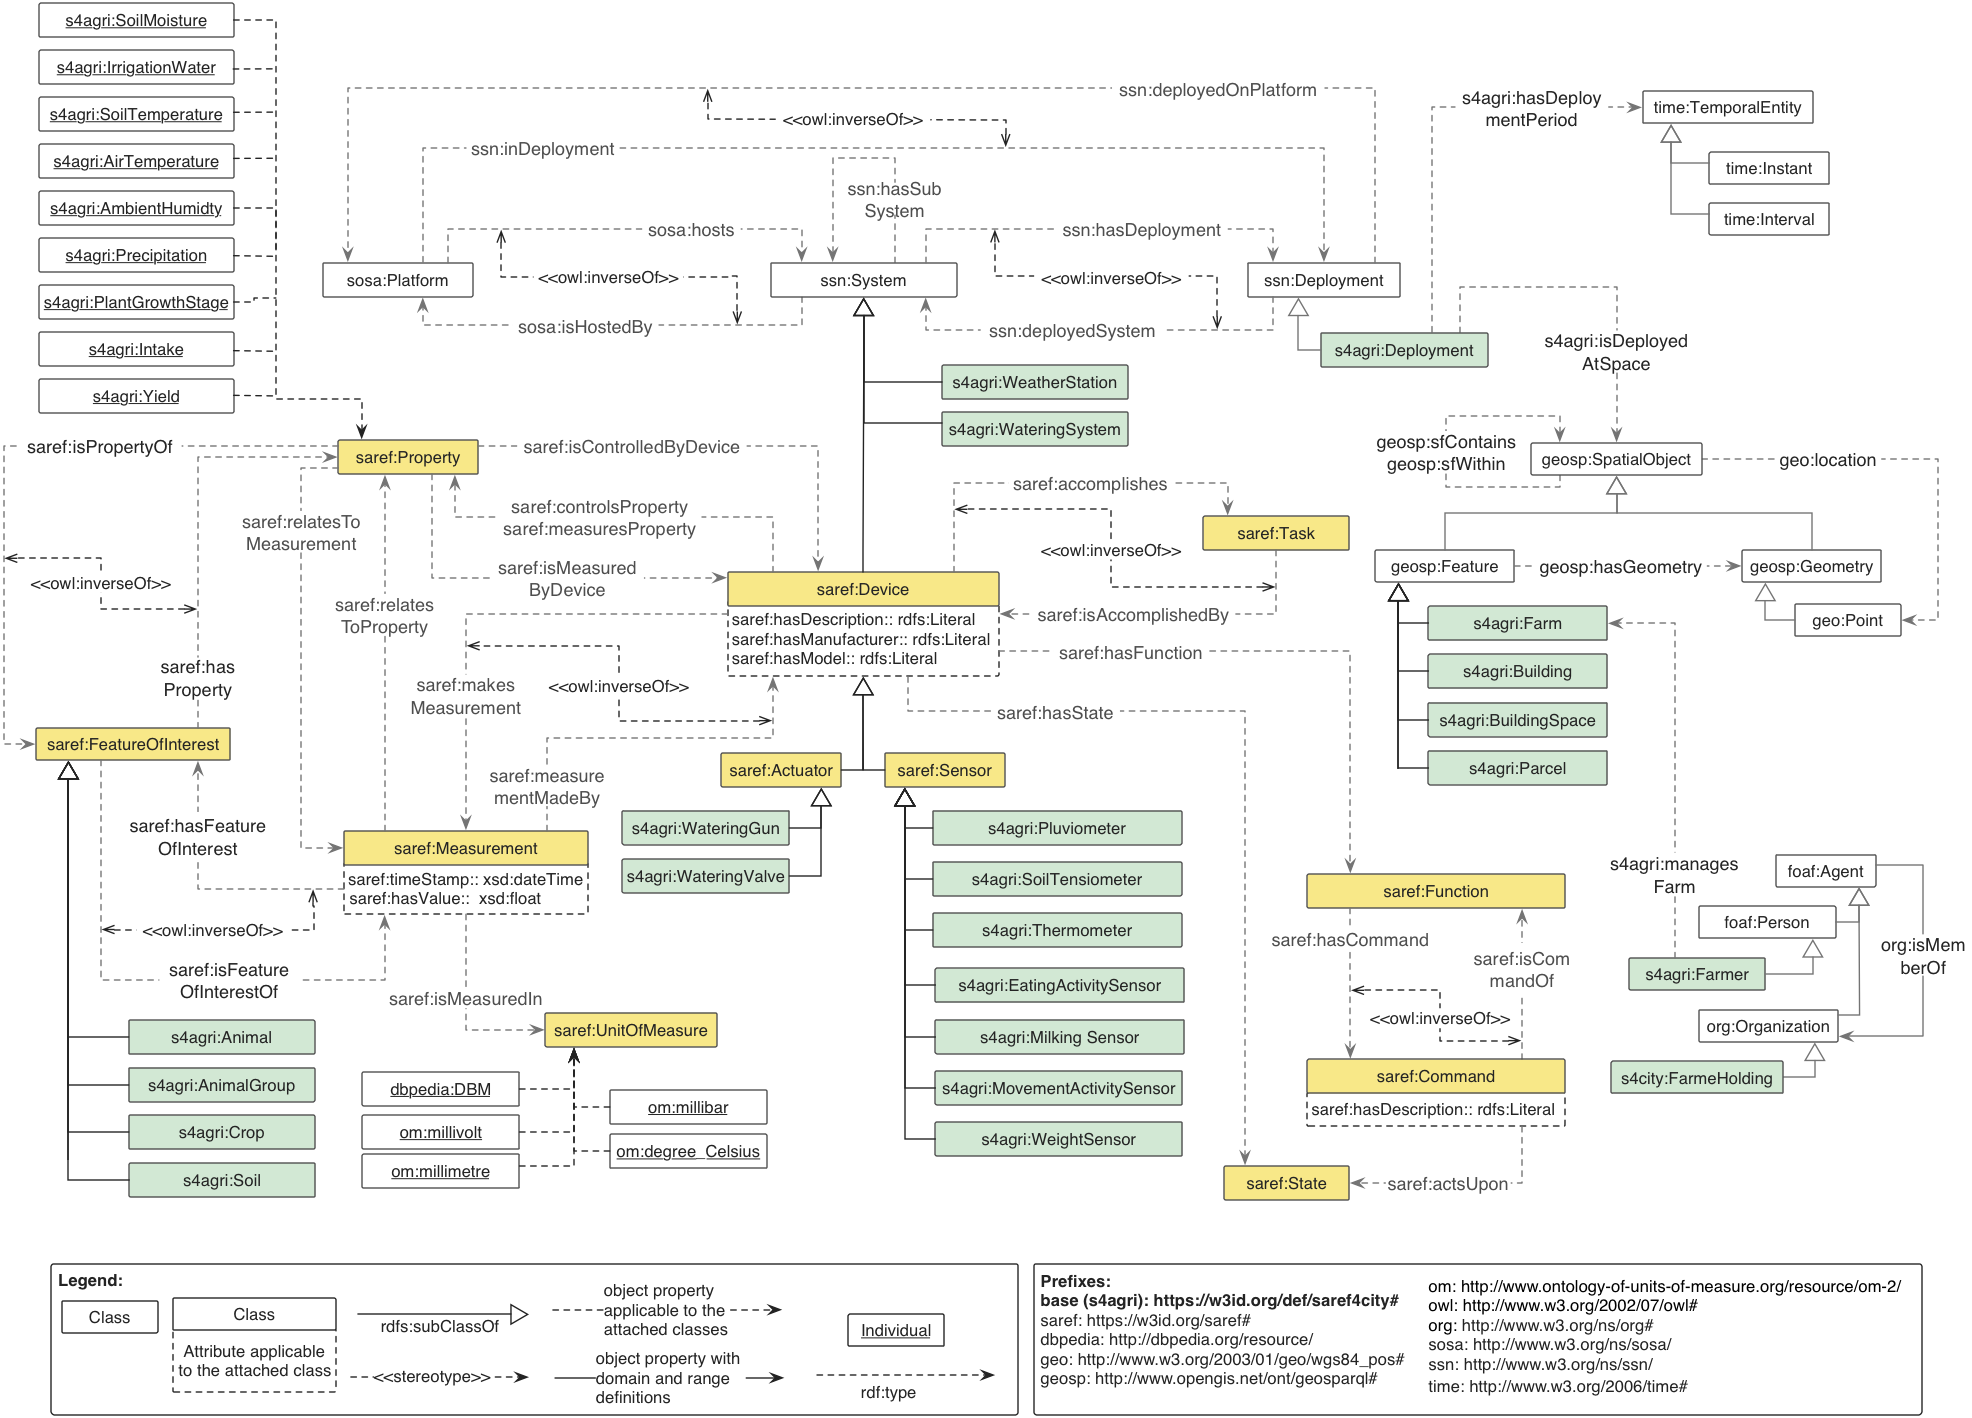 documentation/diagrams/Overview.png